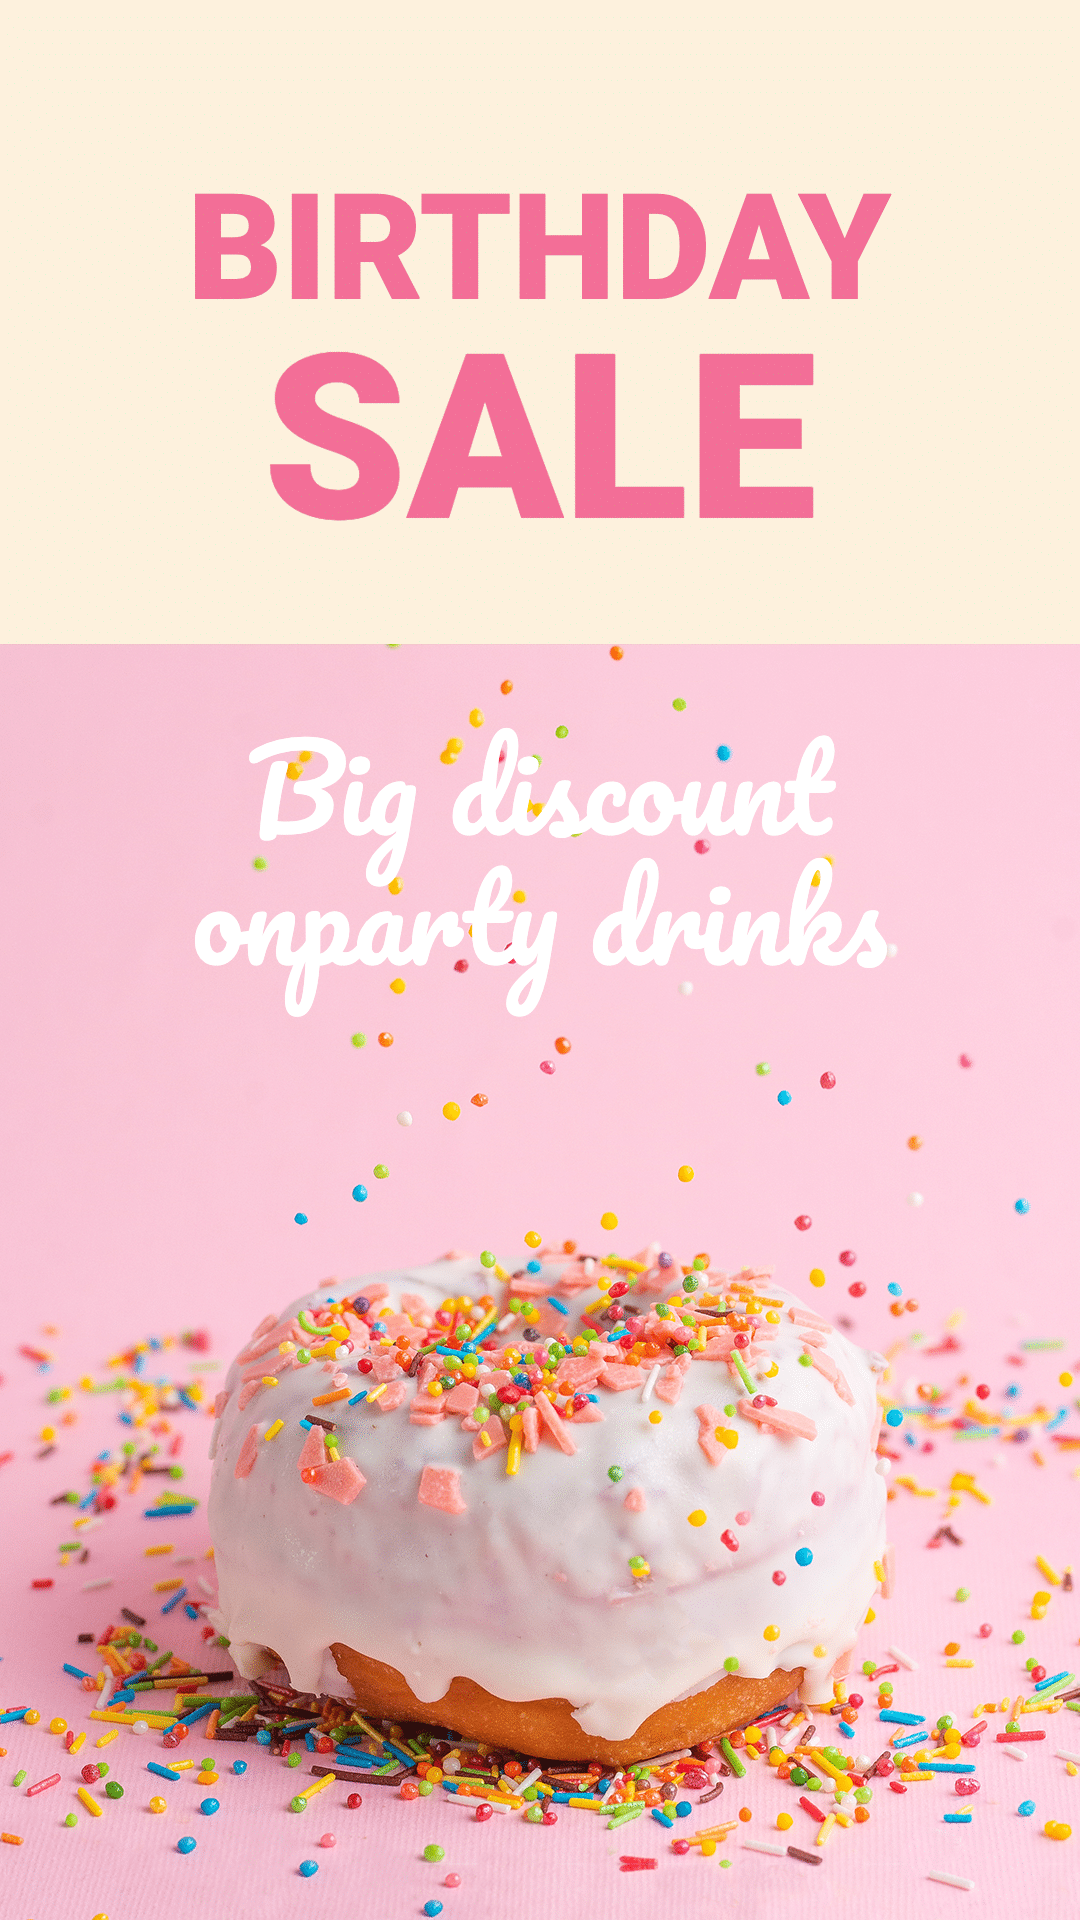 Simple Party Drinks Discount Birthday Sale Ecommerce Story